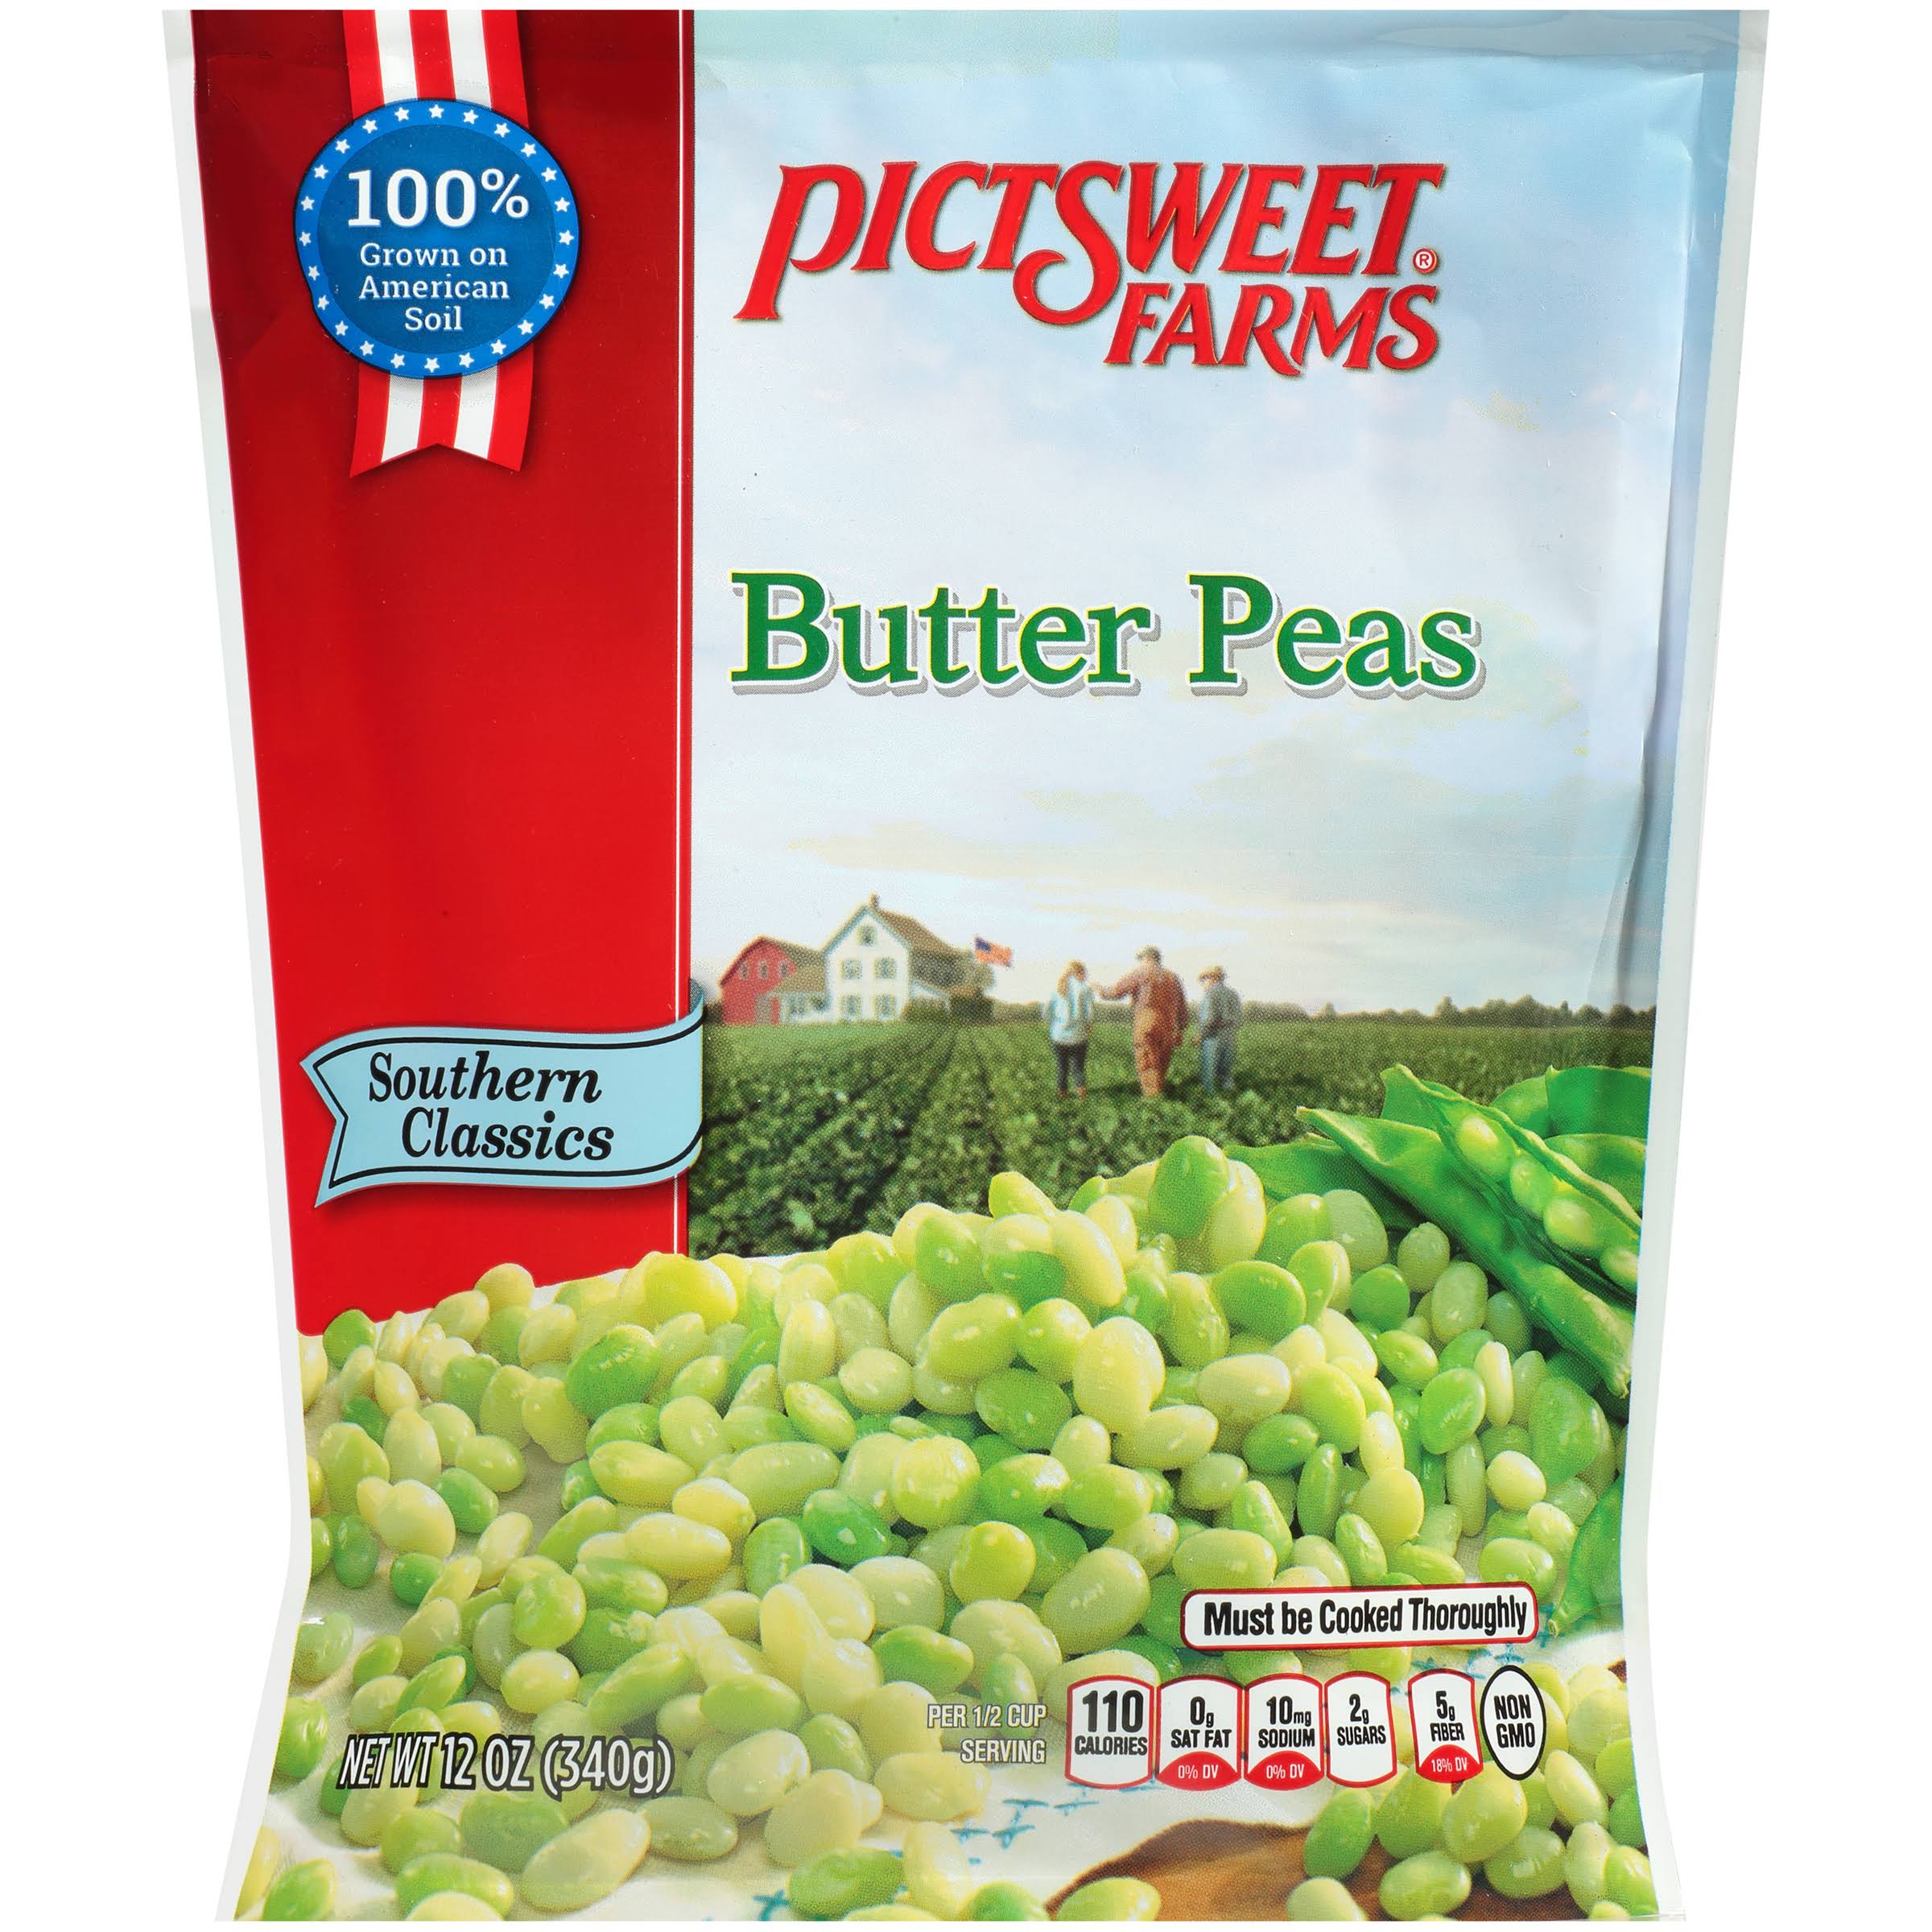 Pictsweet Farms Southern Classics Butter Peas - 12oz